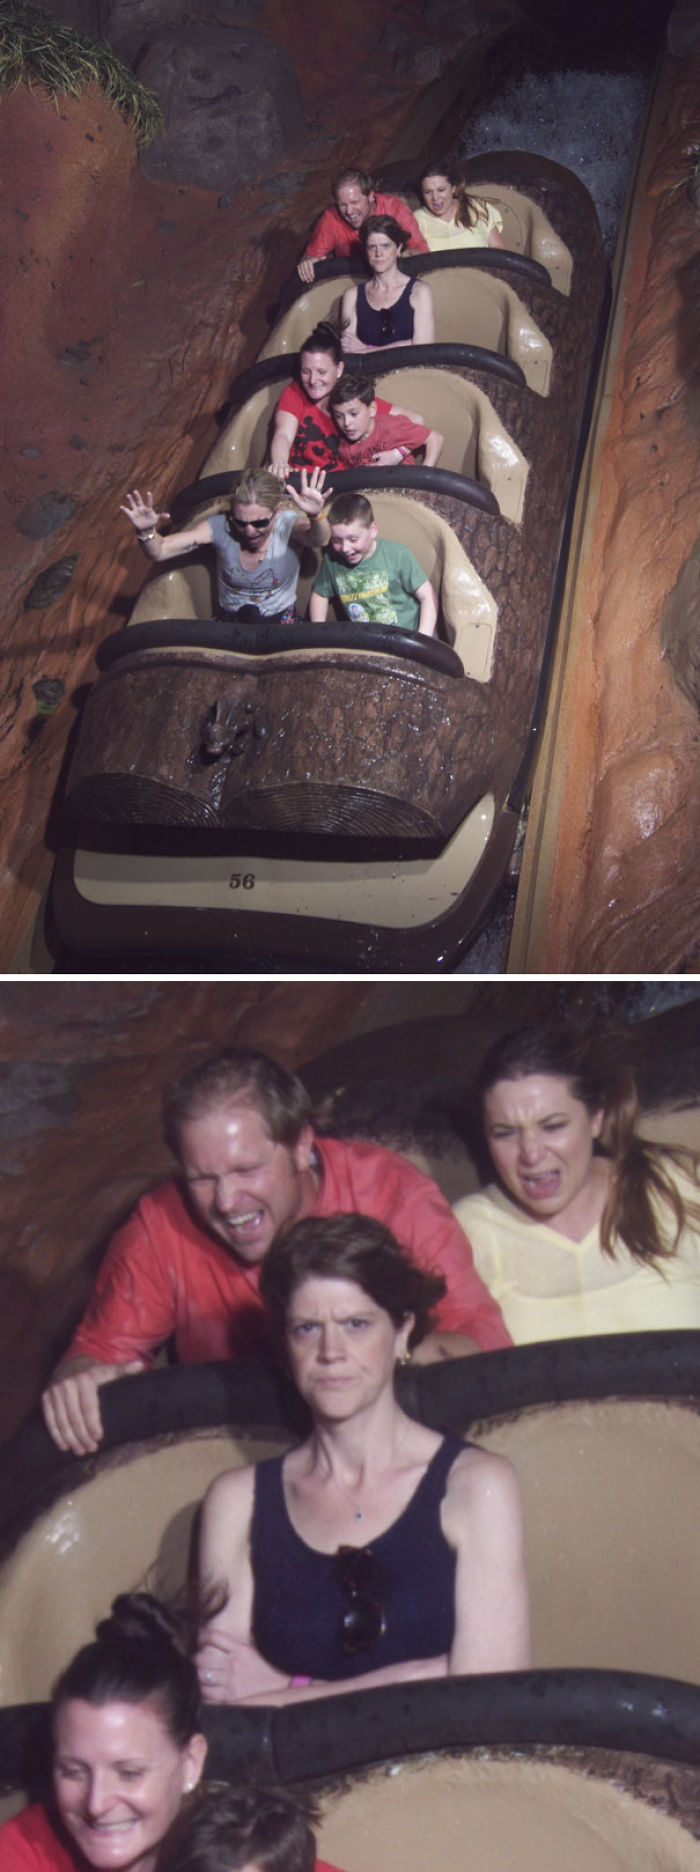 I Wouldn't Go On Splash Mountain With My Wife. Wife Got A Little Perturbed That I Wouldn't Accompany Her On The Ride